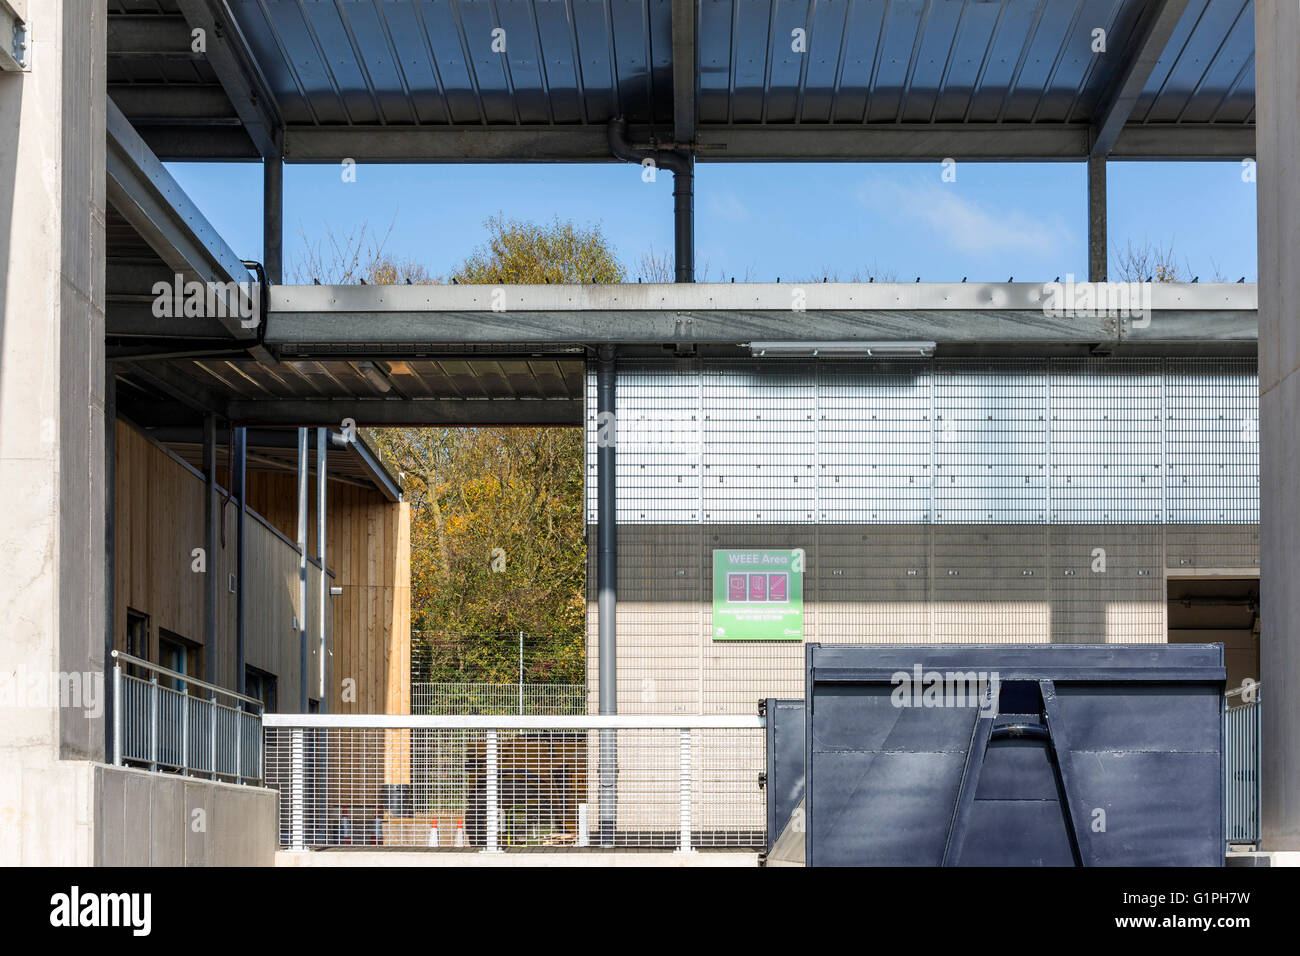 Steel frame and canopy of administration area. Bridport Recycling Centre, Bridport, United Kingdom. Architect: Mitchell Eley Gould, 2015. Stock Photo